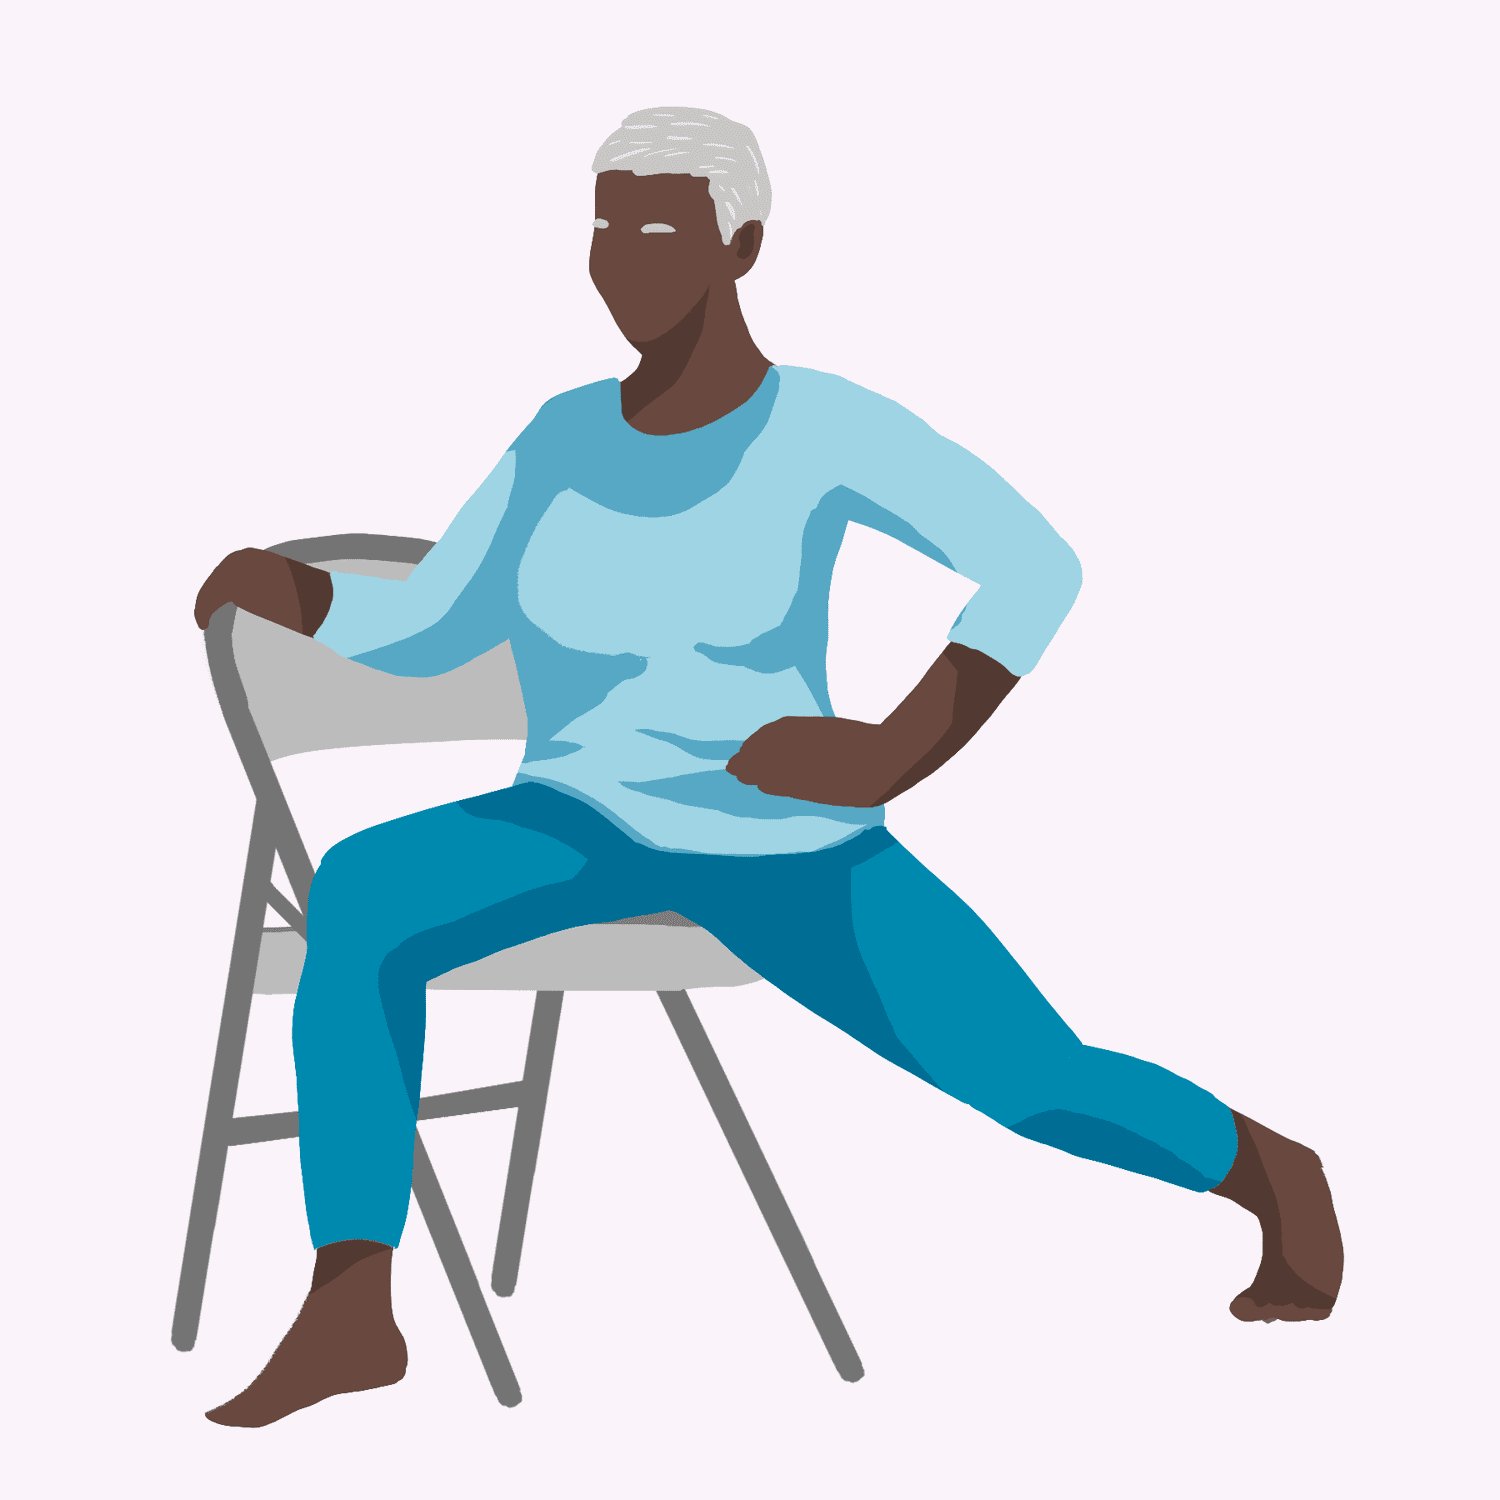 A list of basic chair yoga poses - Sequence Wiz